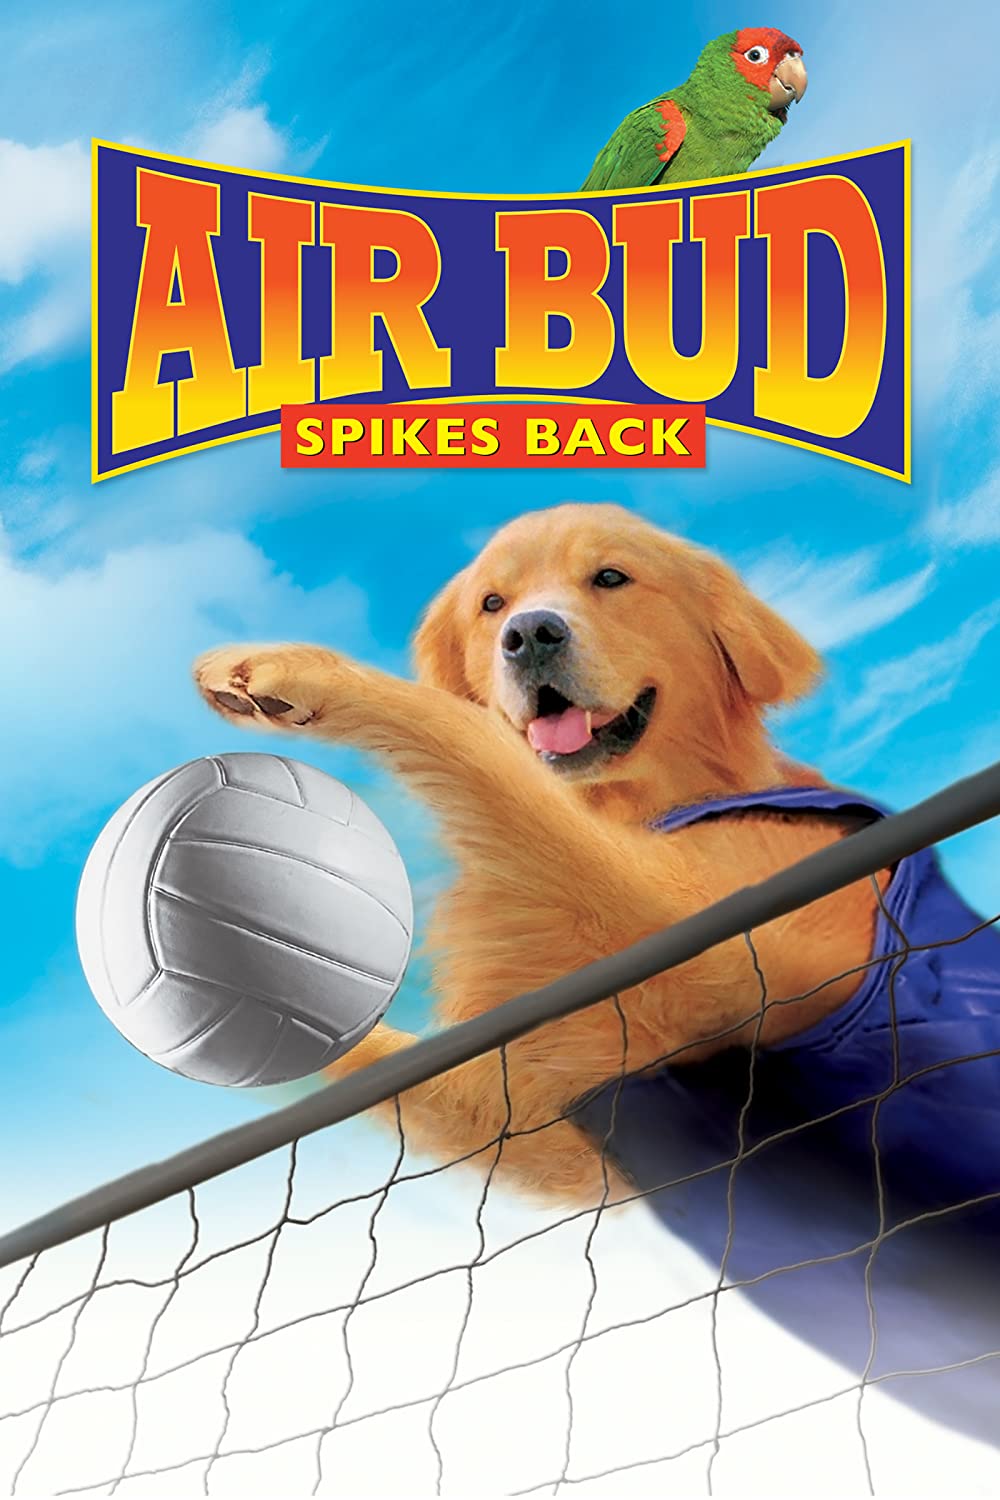 Air Bud: Spikes Back Video 2003